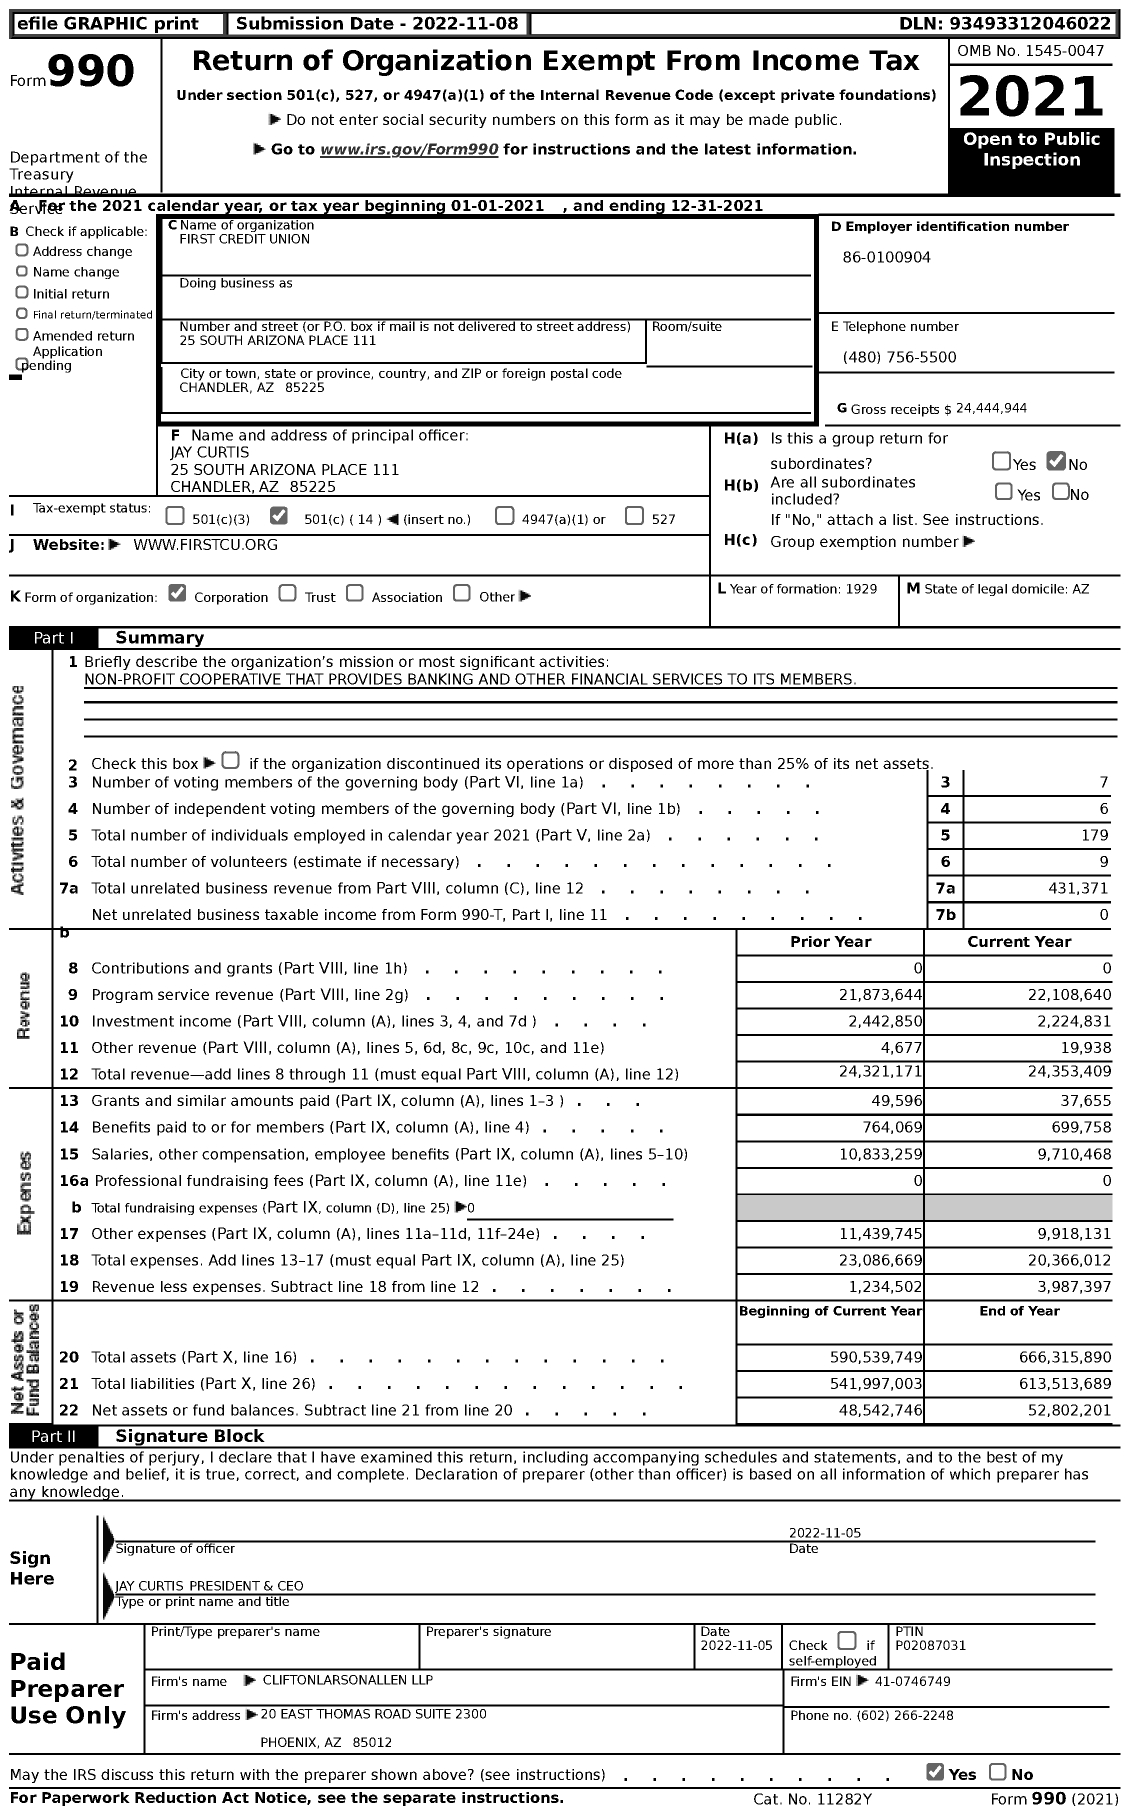 Image of first page of 2021 Form 990 for First Credit Union (FCU)